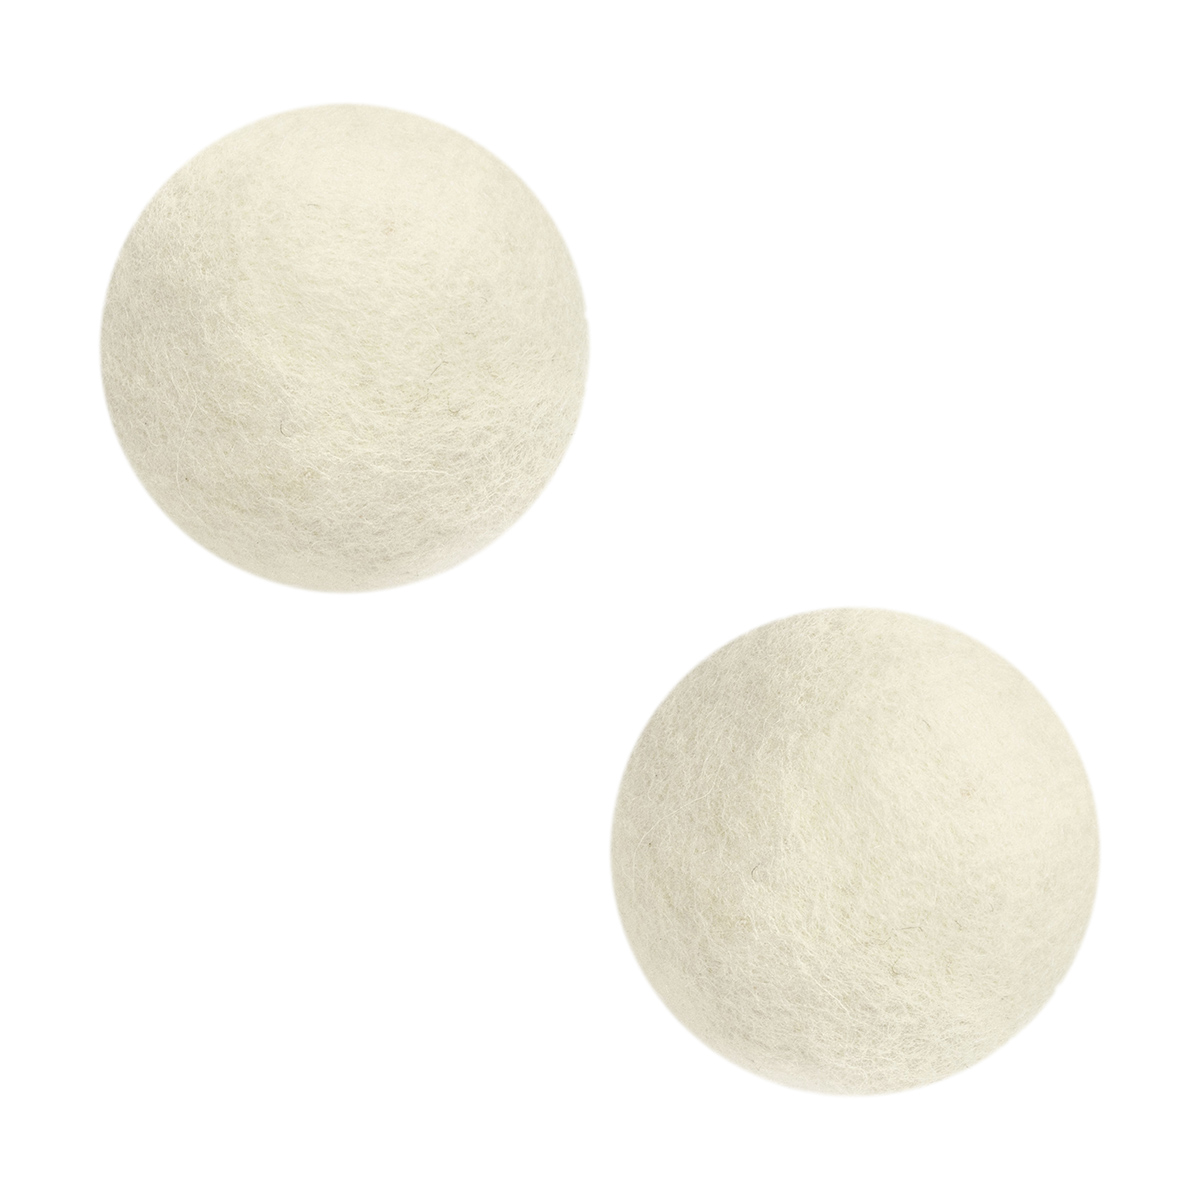 Home Ease 2pc. Wool Dryer Balls